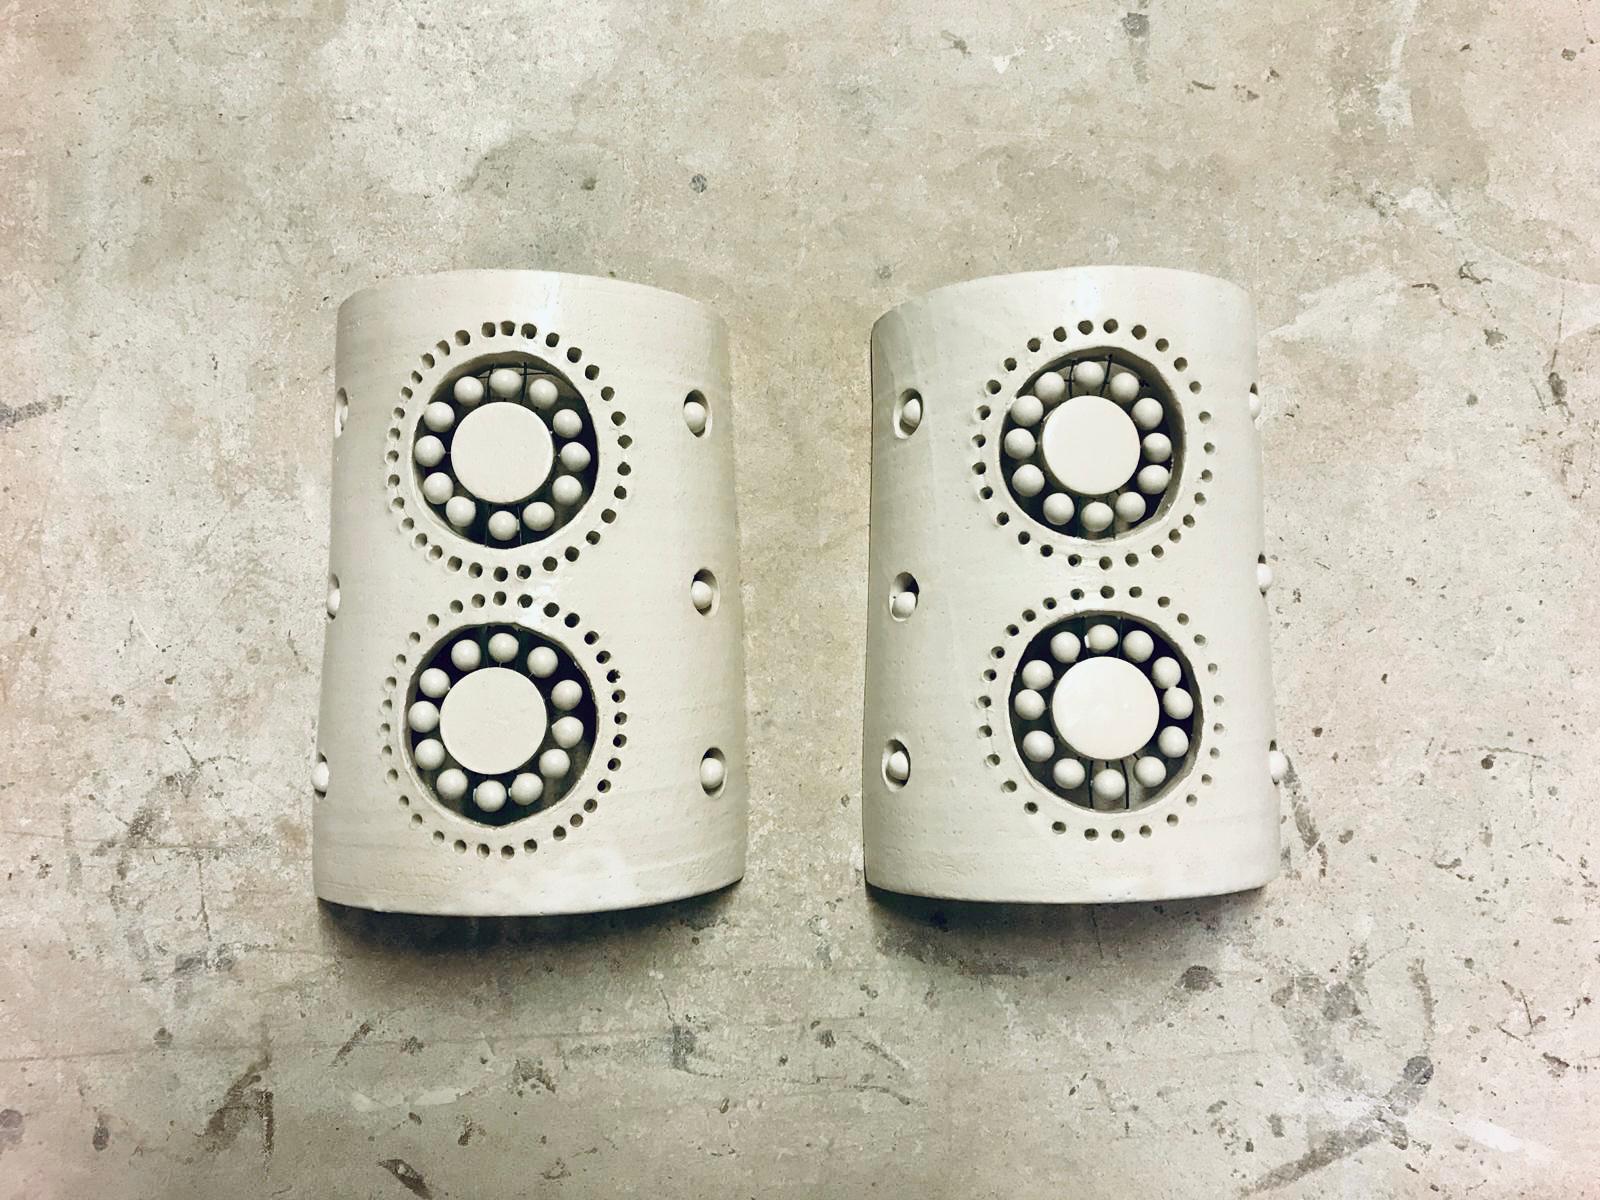 Pair of 2 flowers sconces in white enameled ceramic, as all the Georges Pelletier lamps, this pair of sconces is bringing to your space an amazing light experience when the night falls, and a stunning sculptural presence during the day. Approximate